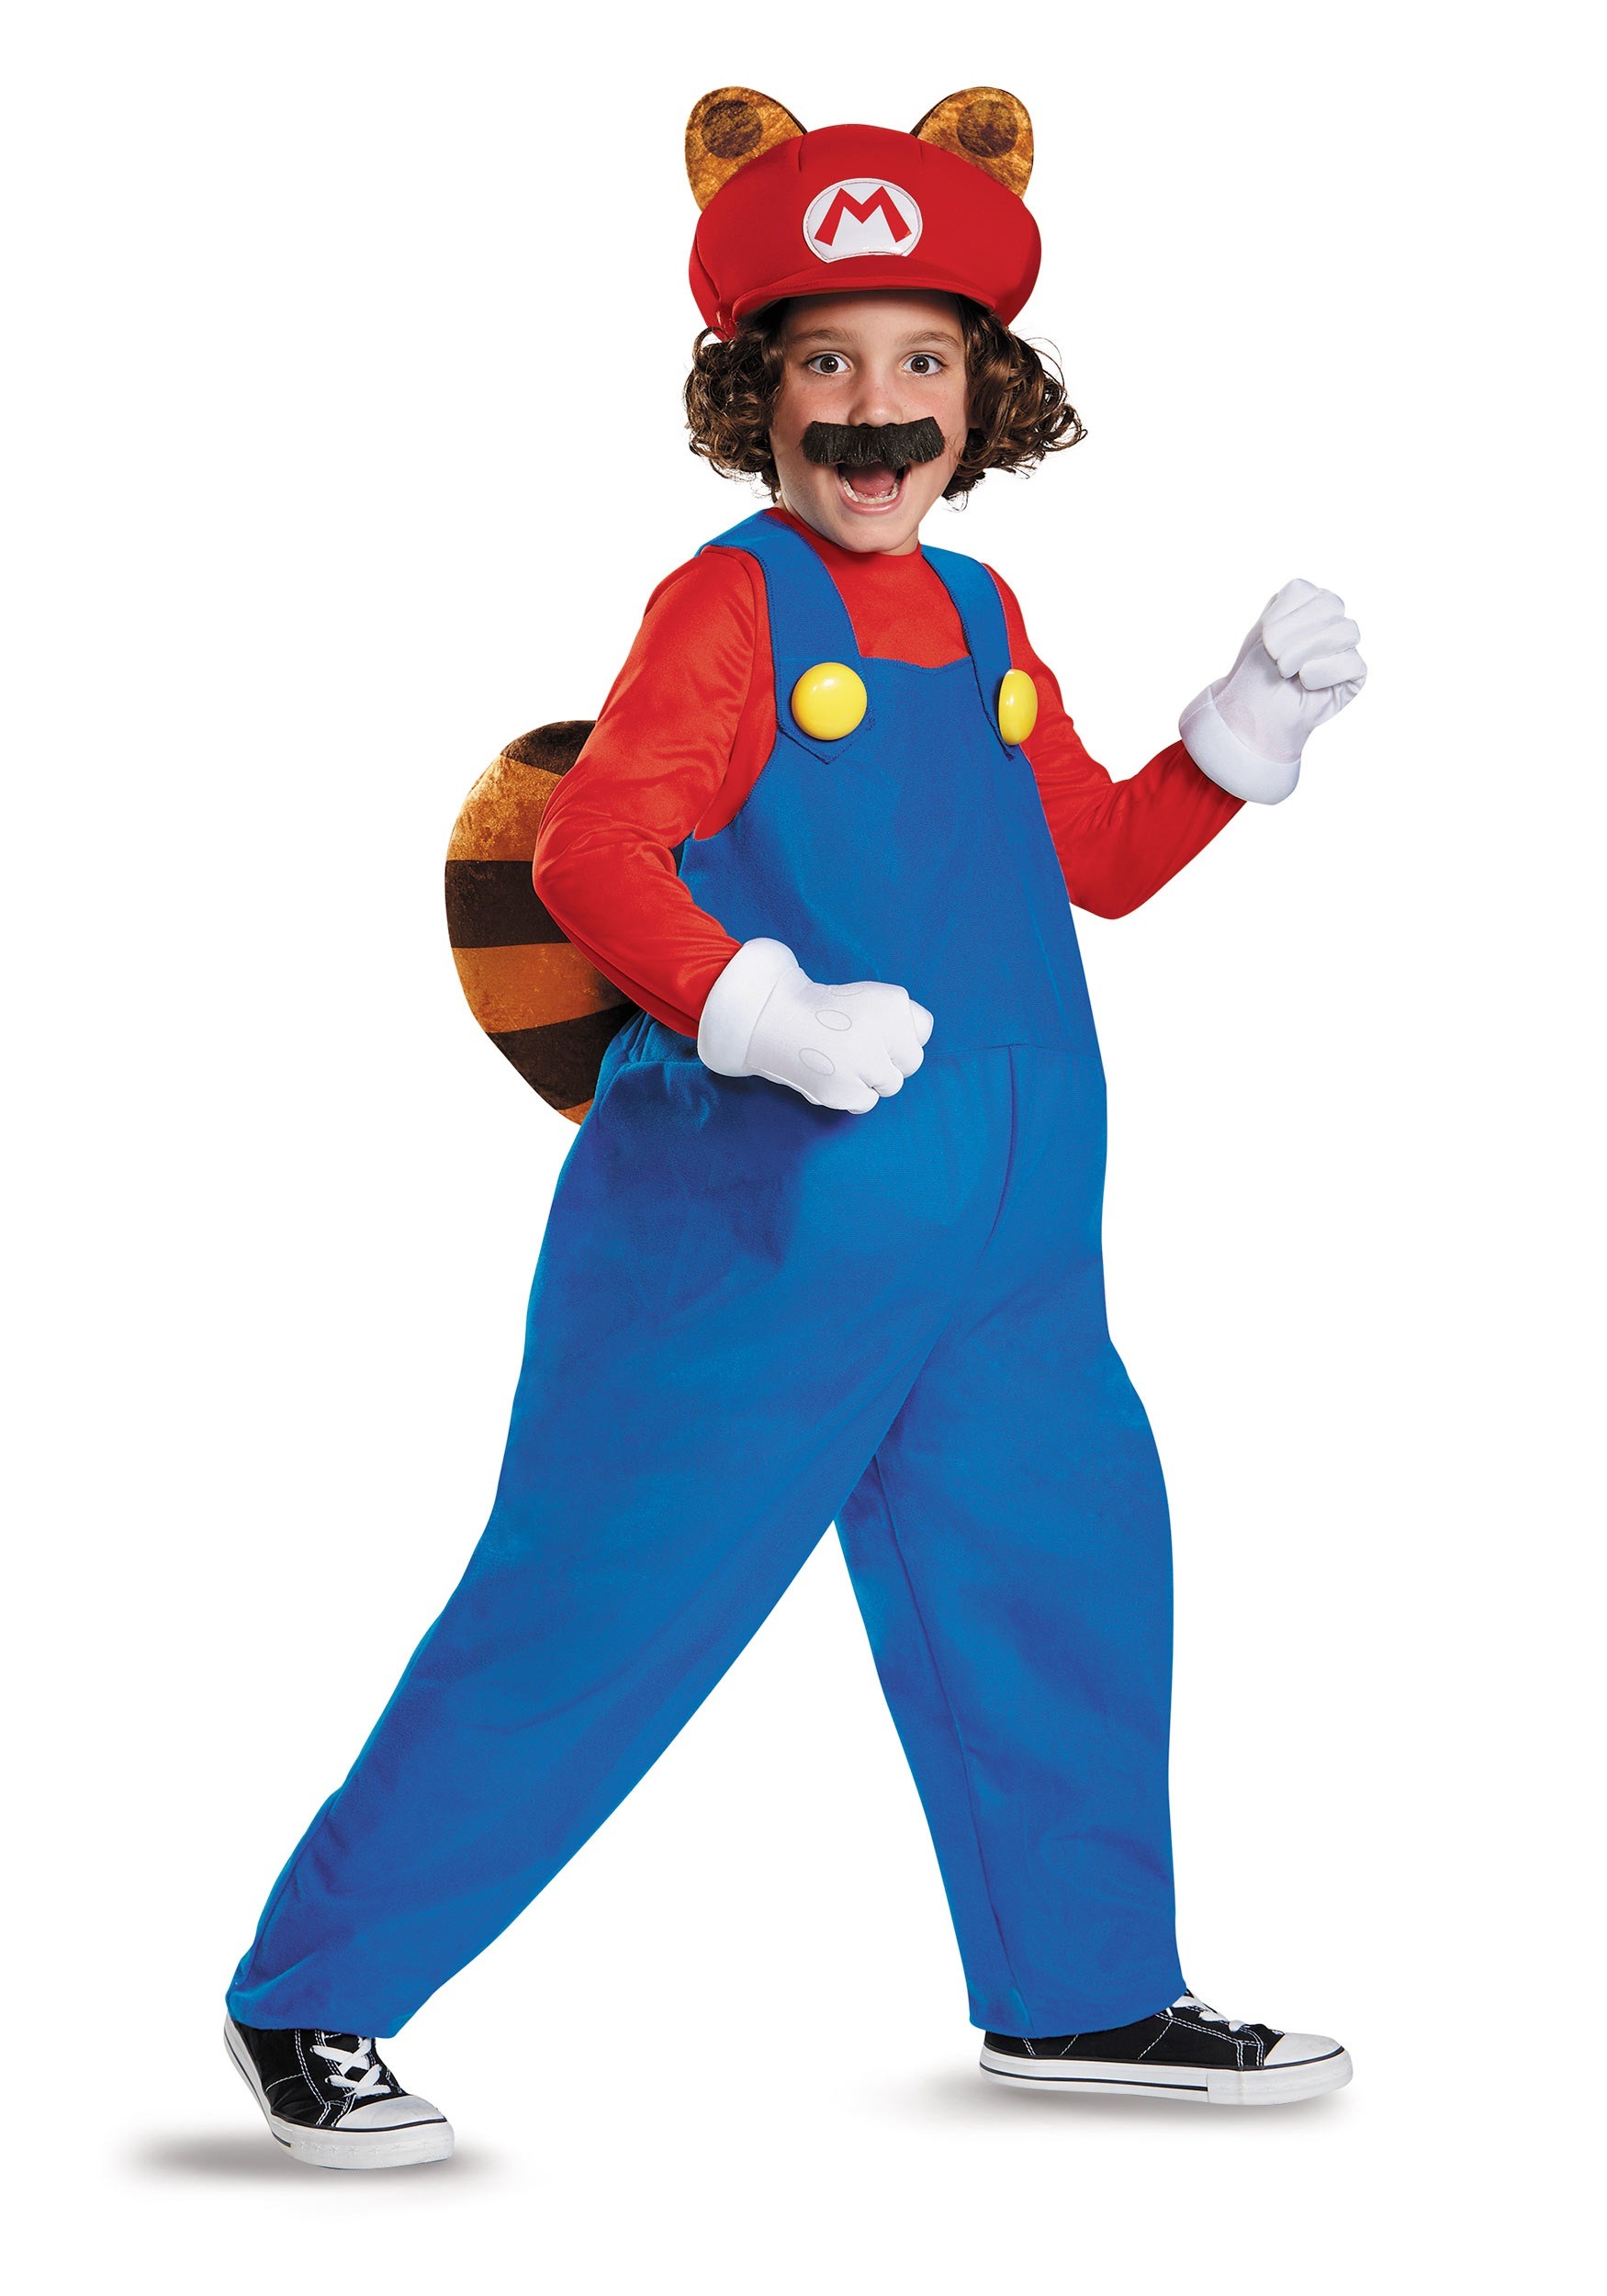 Photos - Fancy Dress Deluxe Disguise  Mario Raccoon Costume for Kids Red/Blue DI98818 